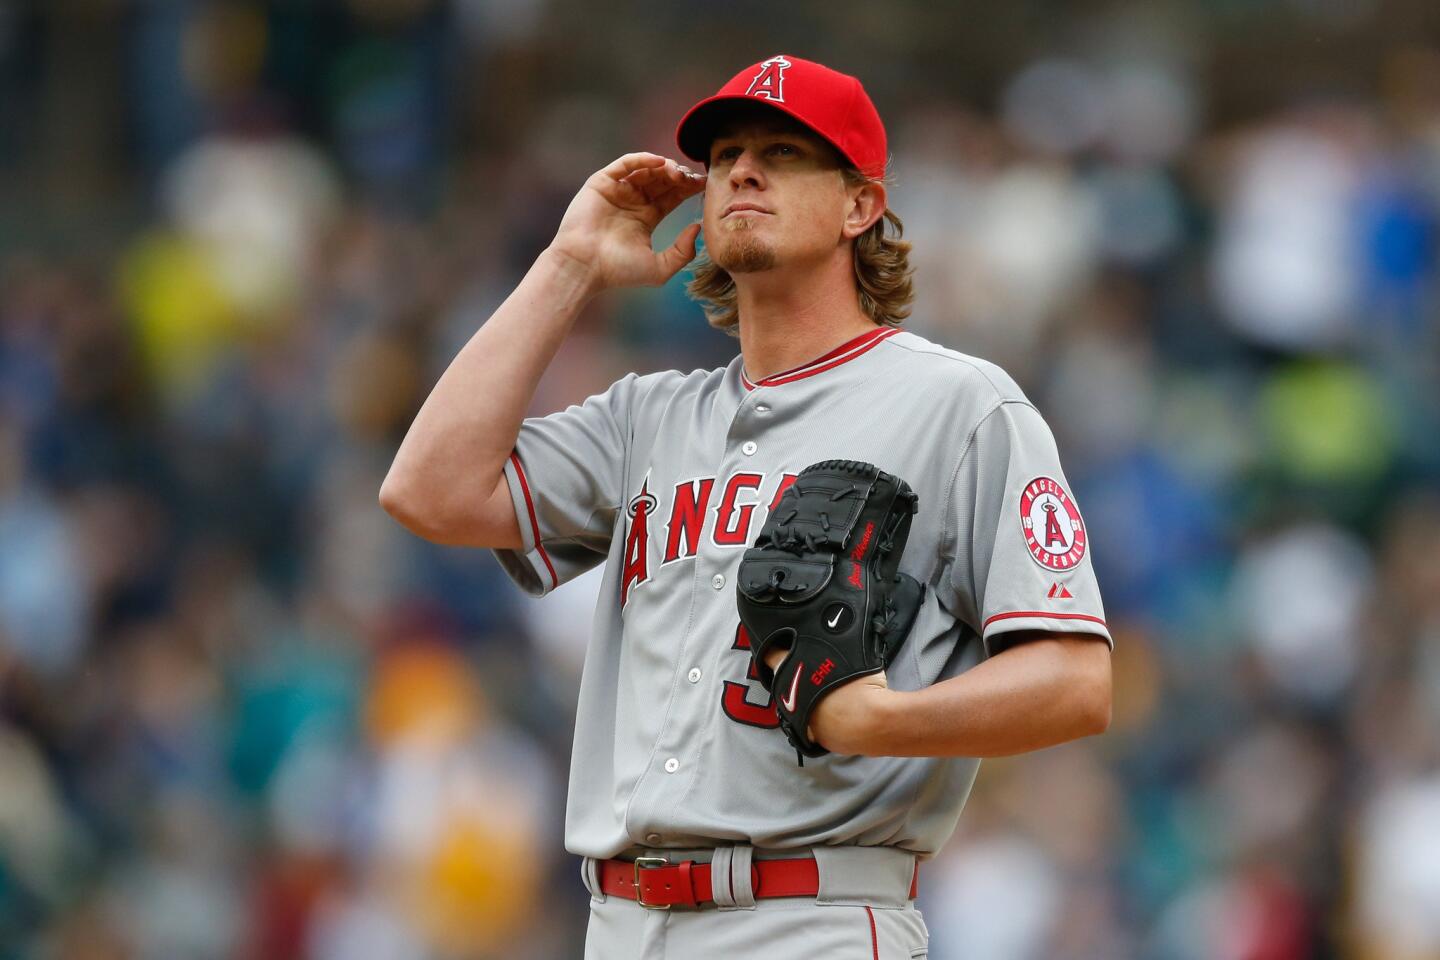 Right-hander Jered Weaver gave up four runs on eight hits in six innings of work as the Angels fell to the Seattle Mariners, 4-1.